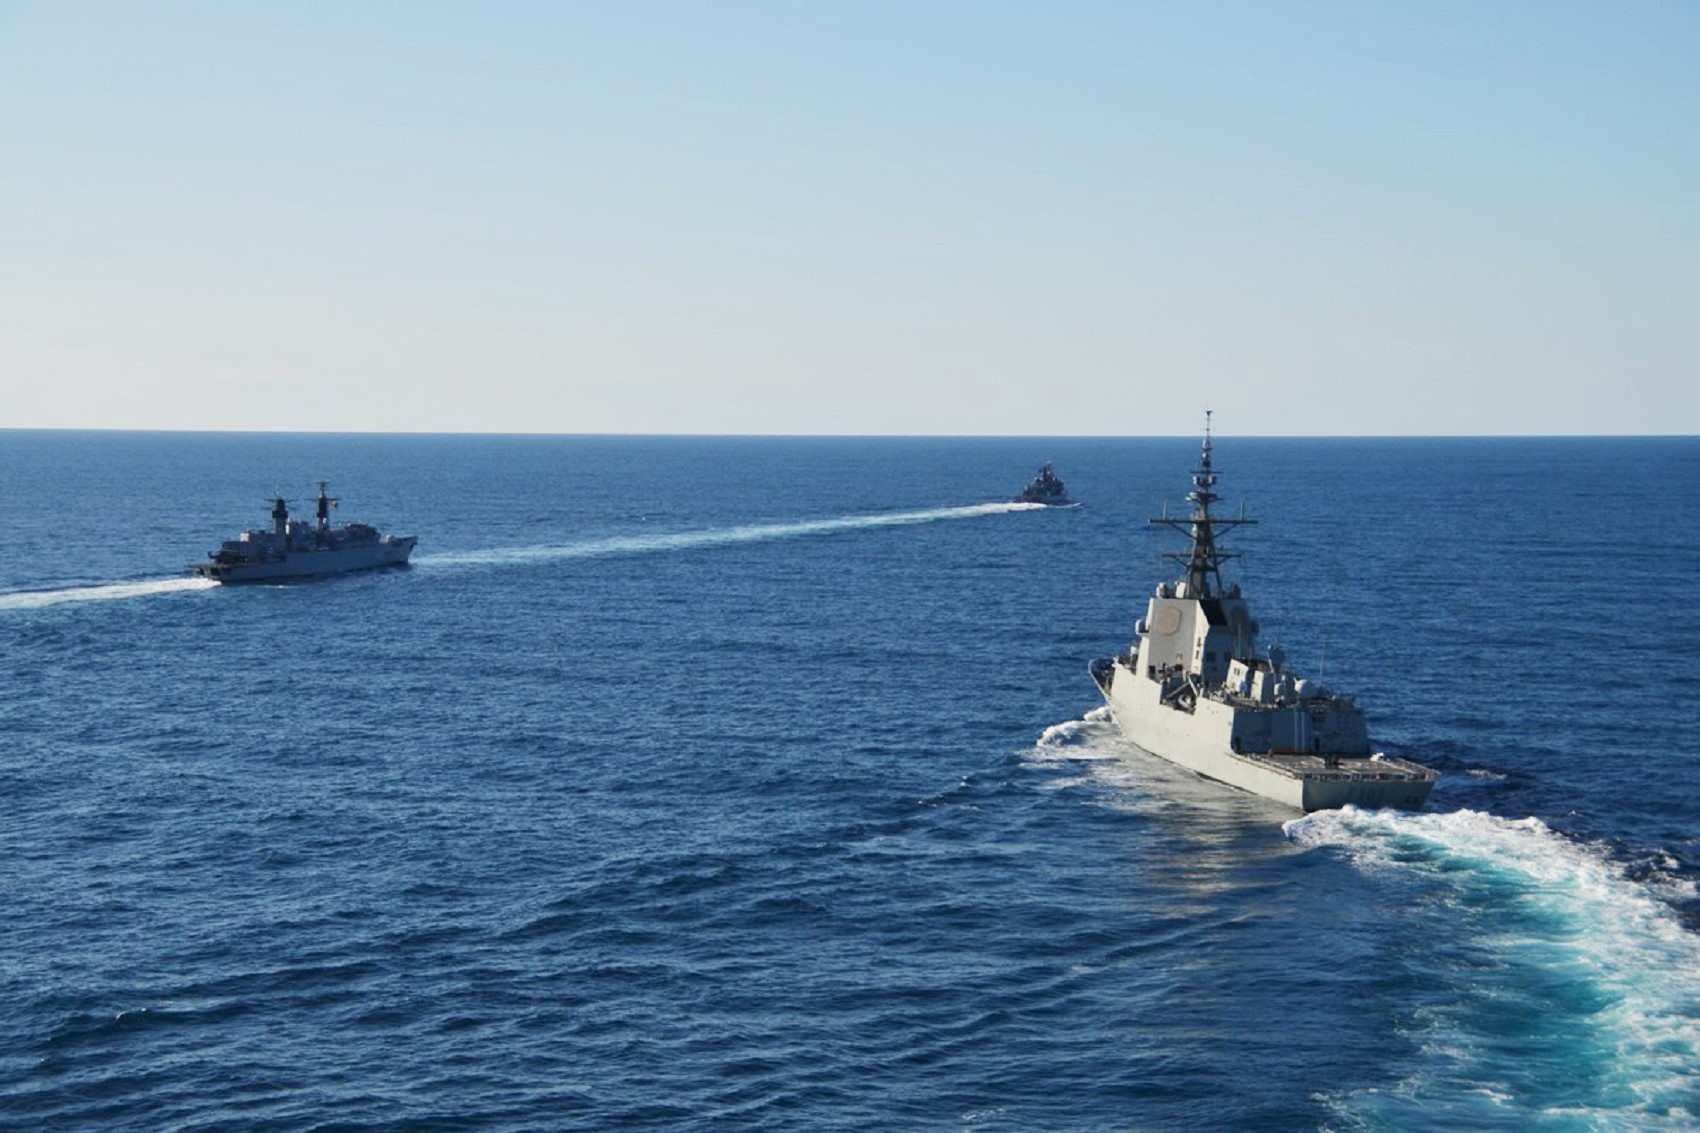 The ‘Álvaro de Bazán’ frigate takes part in exercises with allied countries in the Black Sea Sea